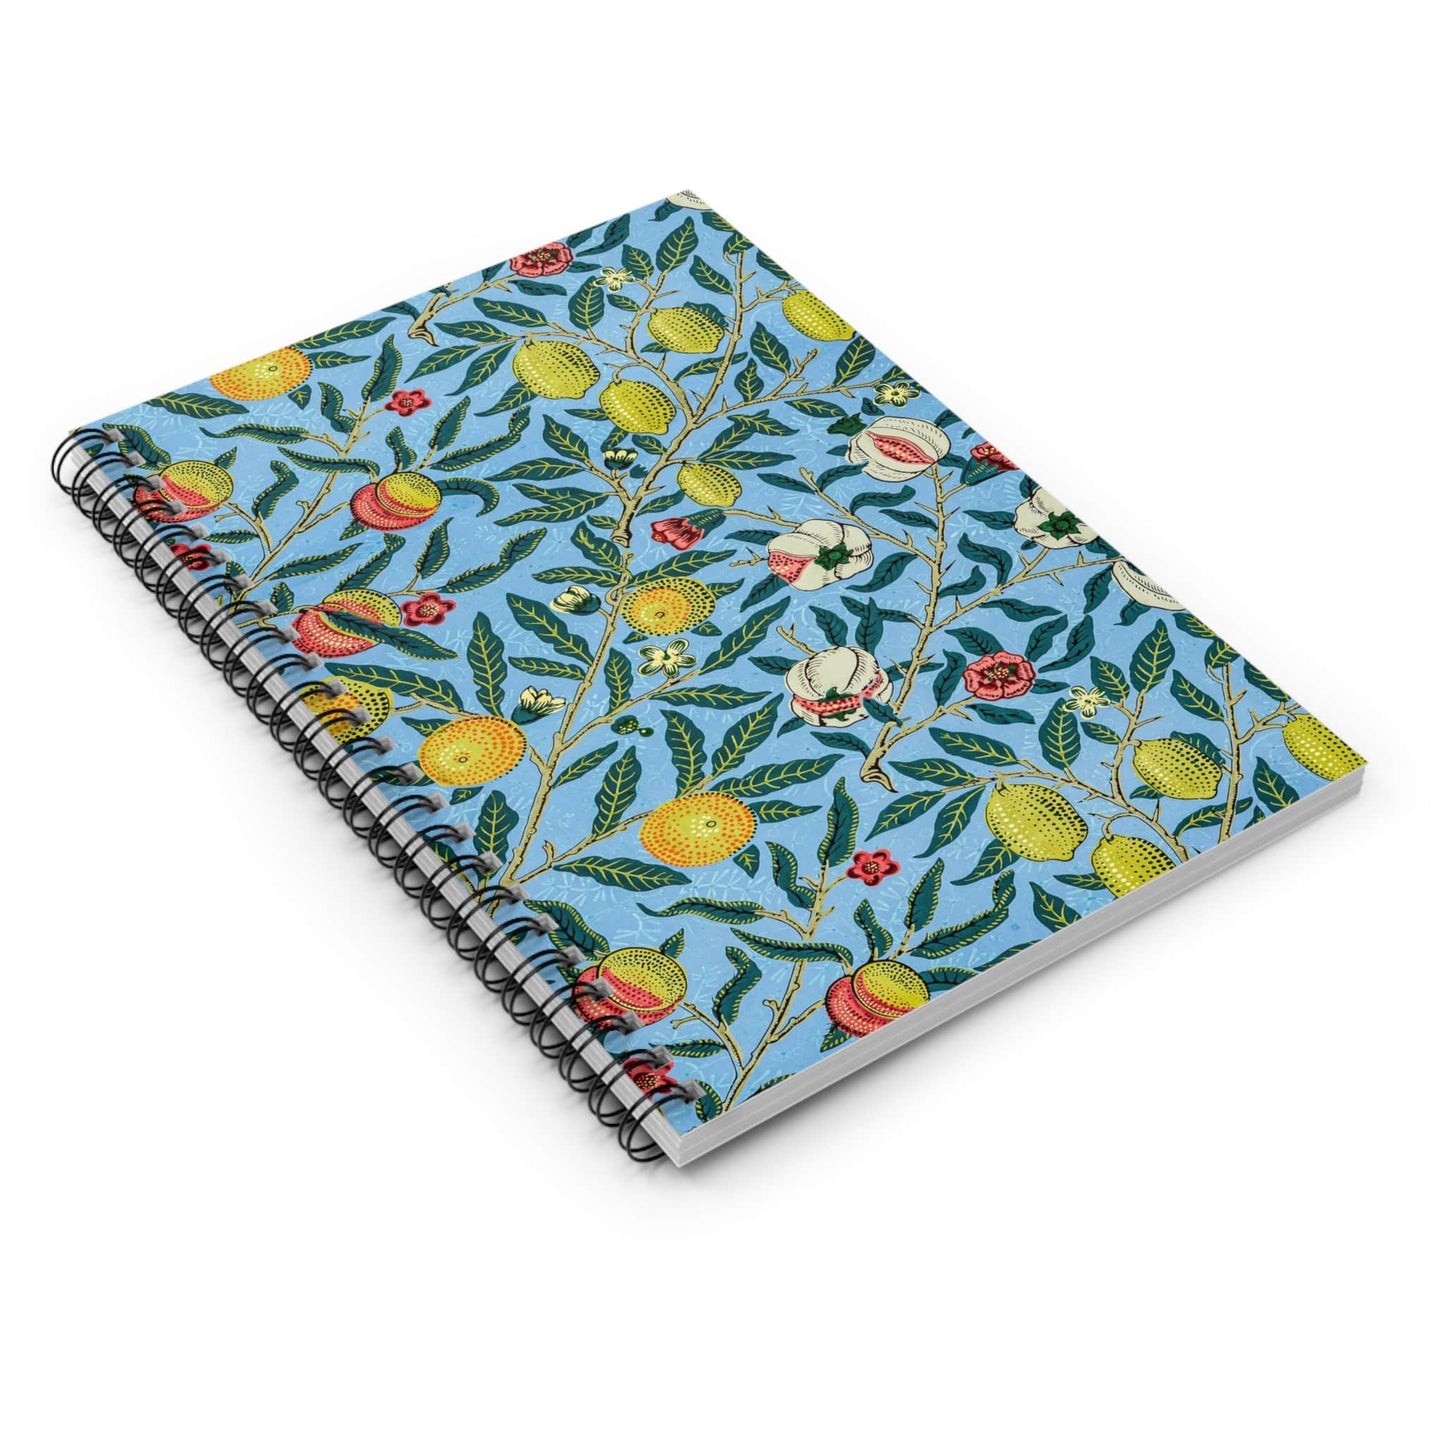 Eclectic Plants Spiral Notebook Laying Flat on White Surface